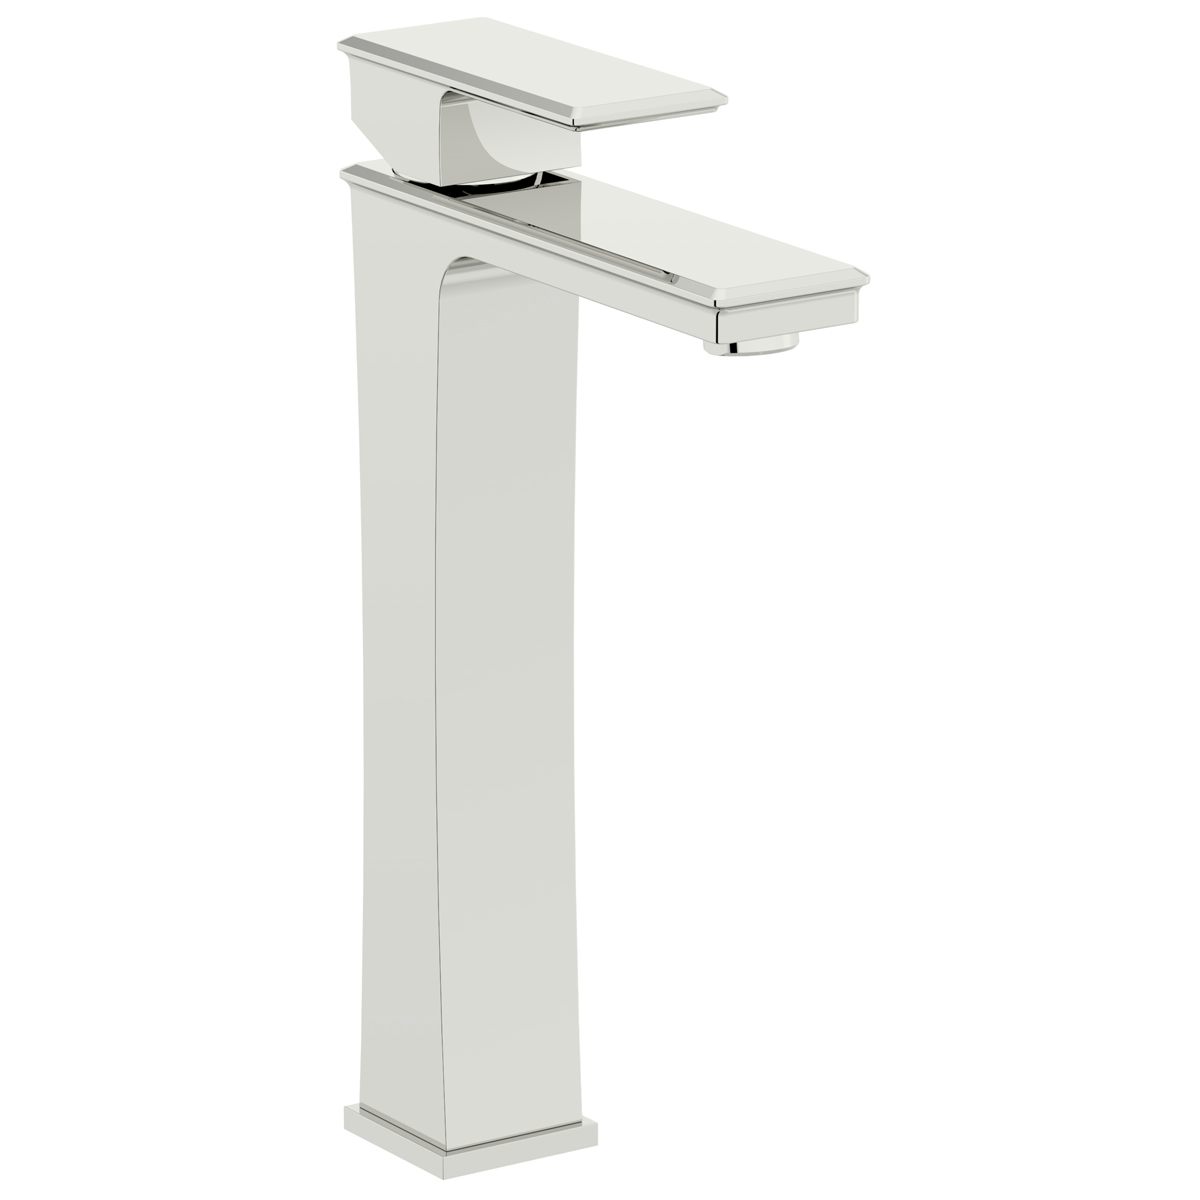 Mode Hale high rise basin mixer tap with unslotted waste